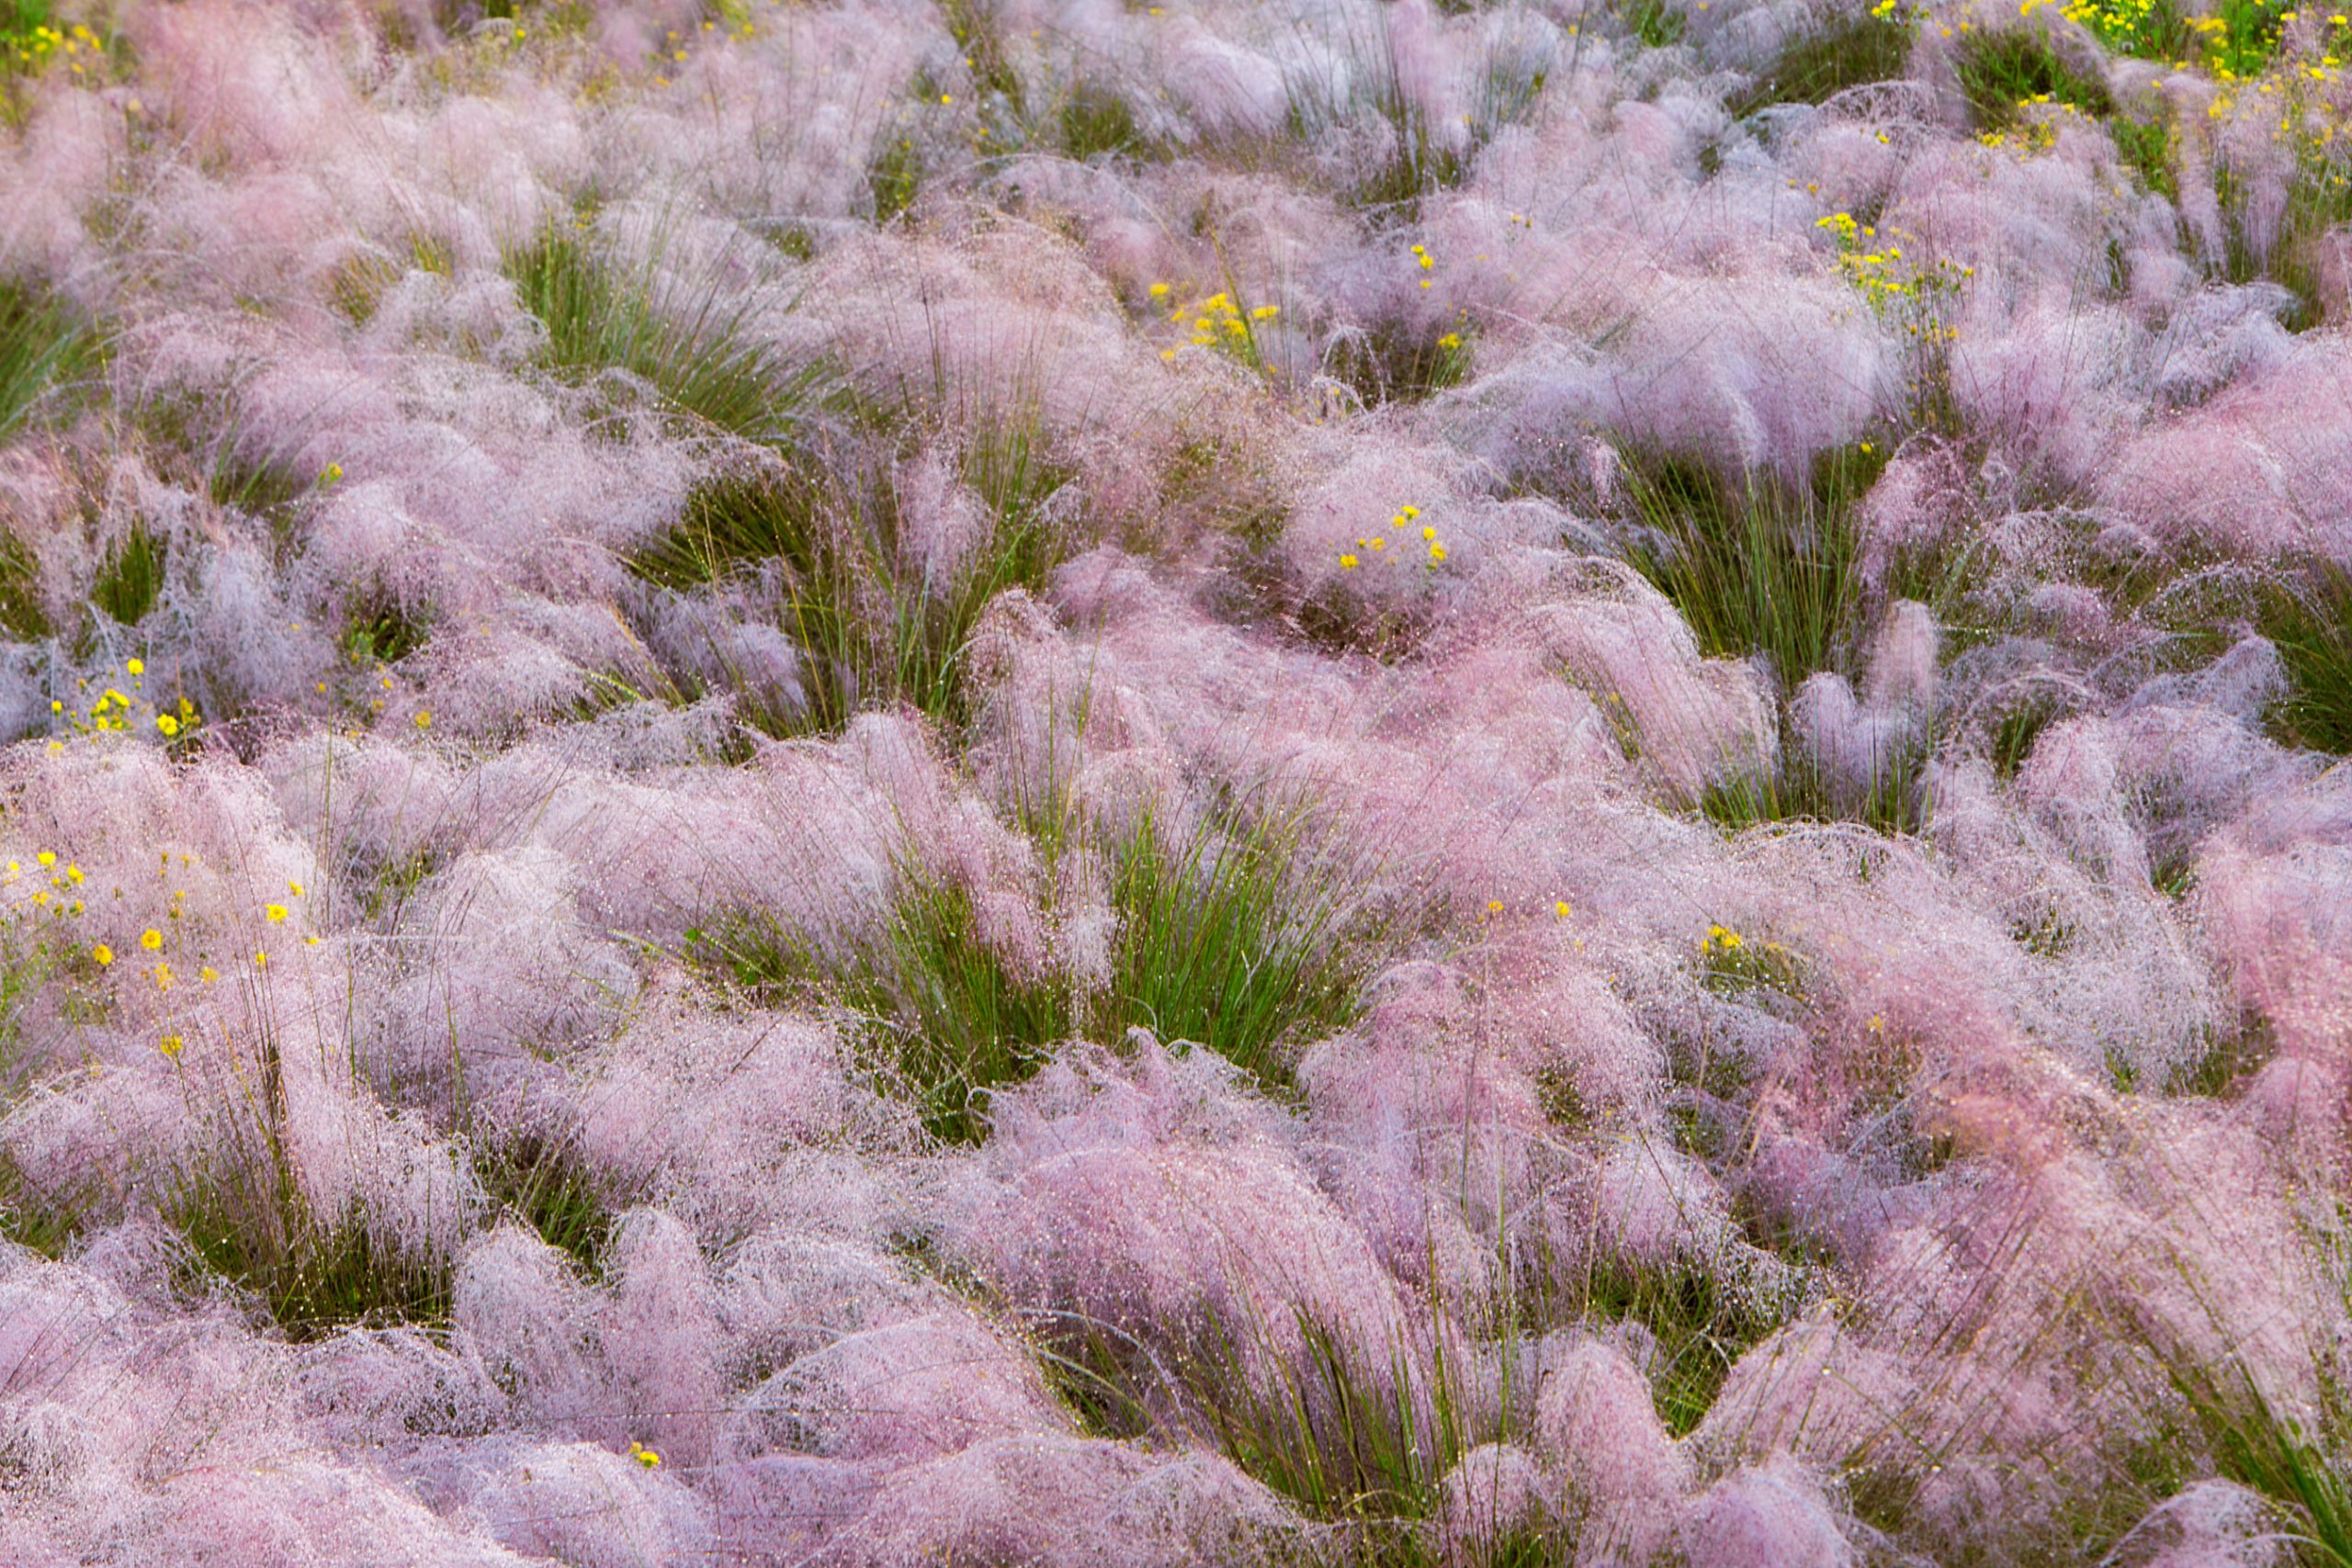  Dew at dawn covers the flowering stems of pink muhly grass growing behind the dune line. The grass stems are used by the sweetgrass basket artisans, whose baskets decorate the alleys, roadsides, and corner markets in the Charleston area. 
